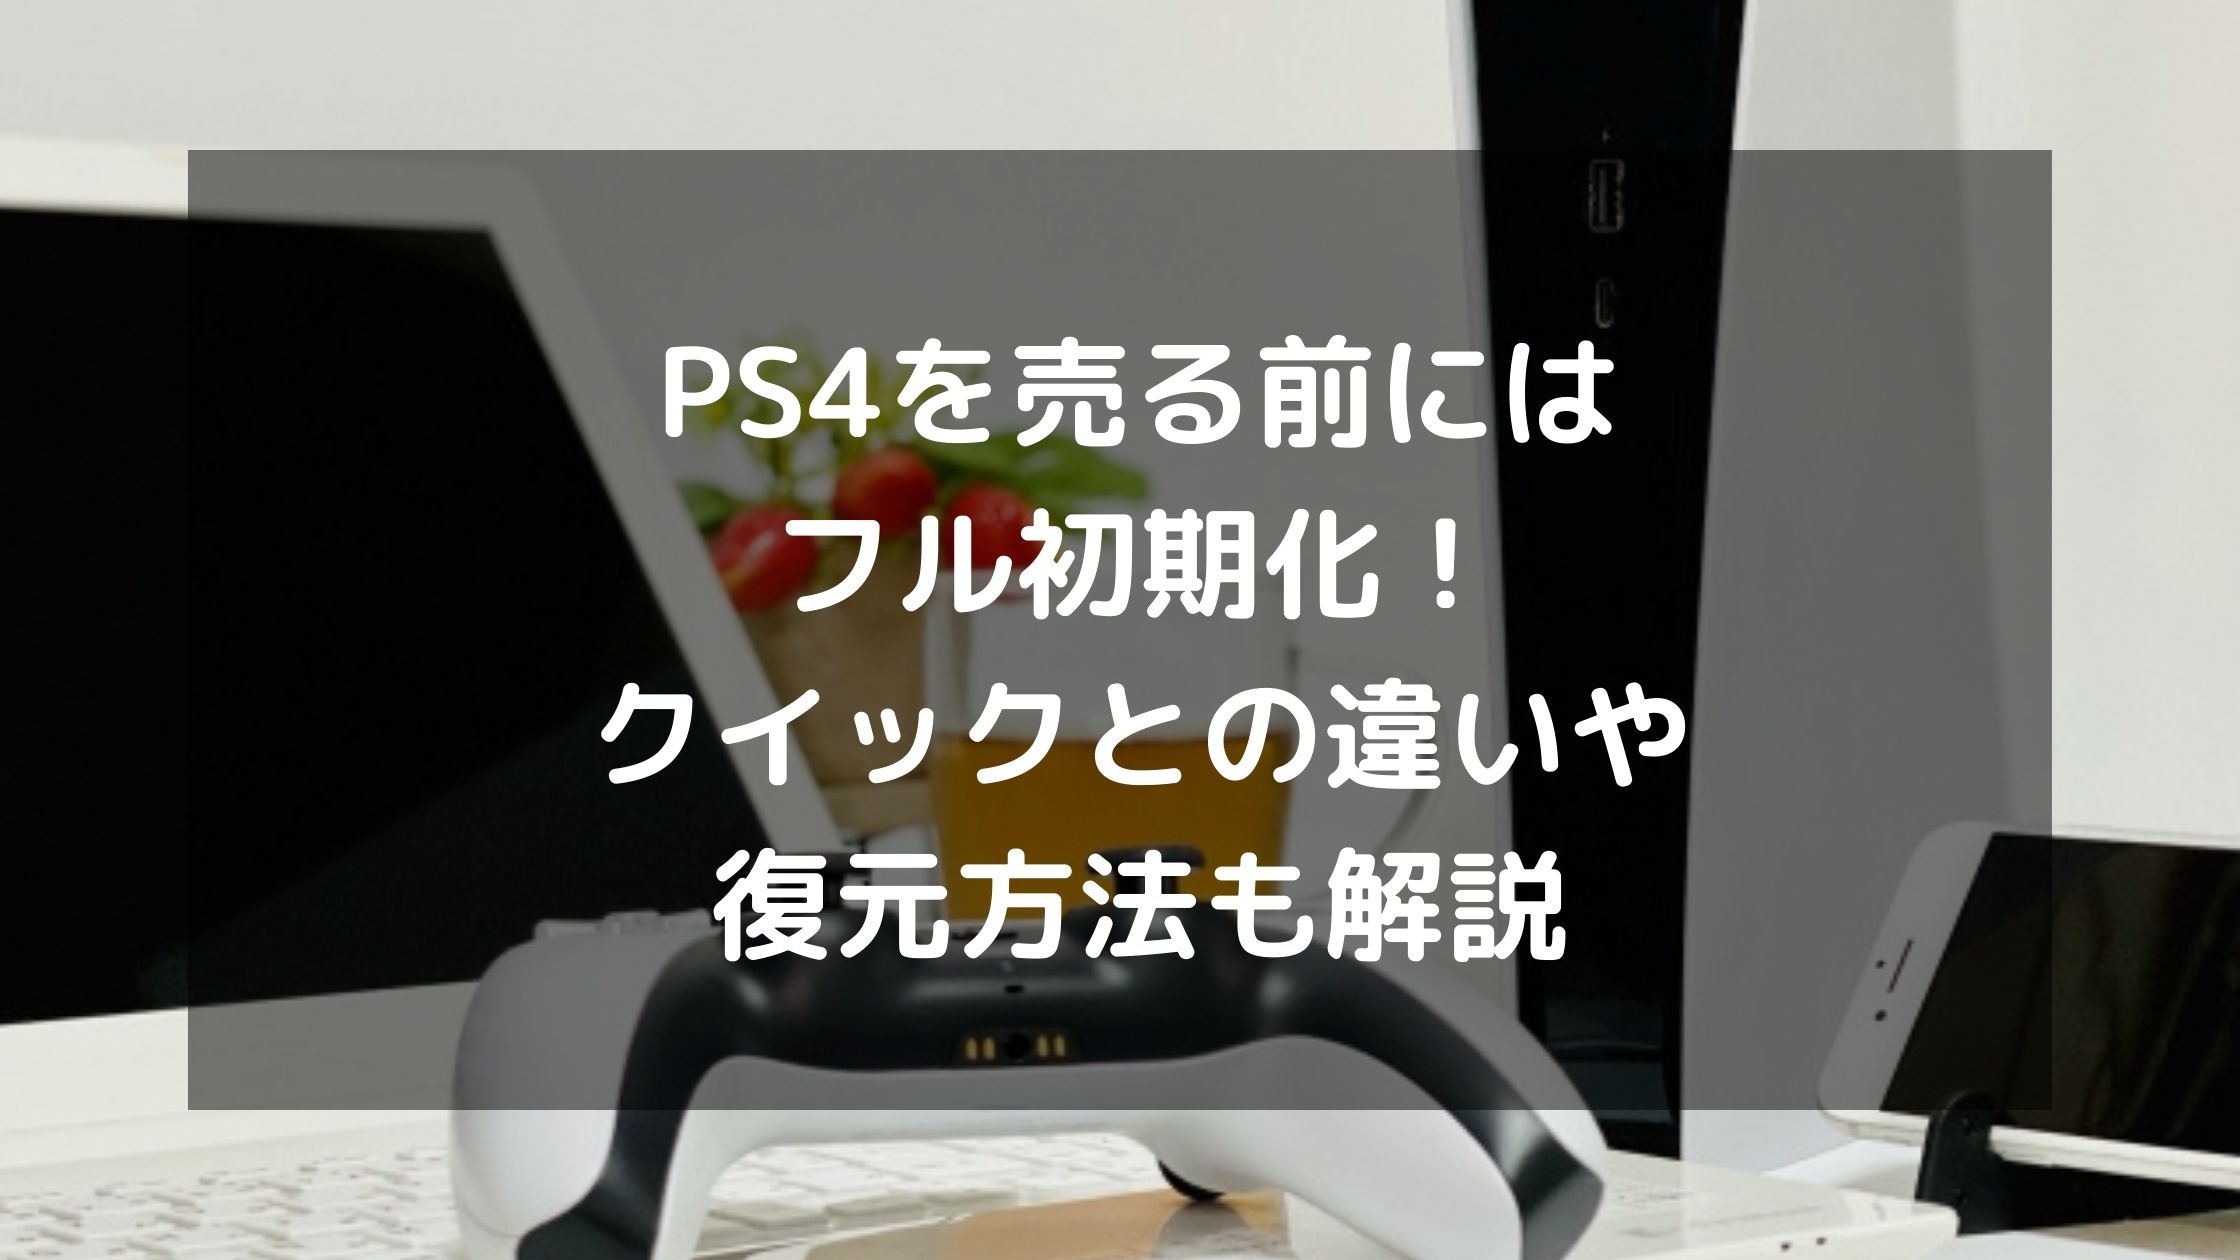 ps4 本体 箱あり 初期化済み